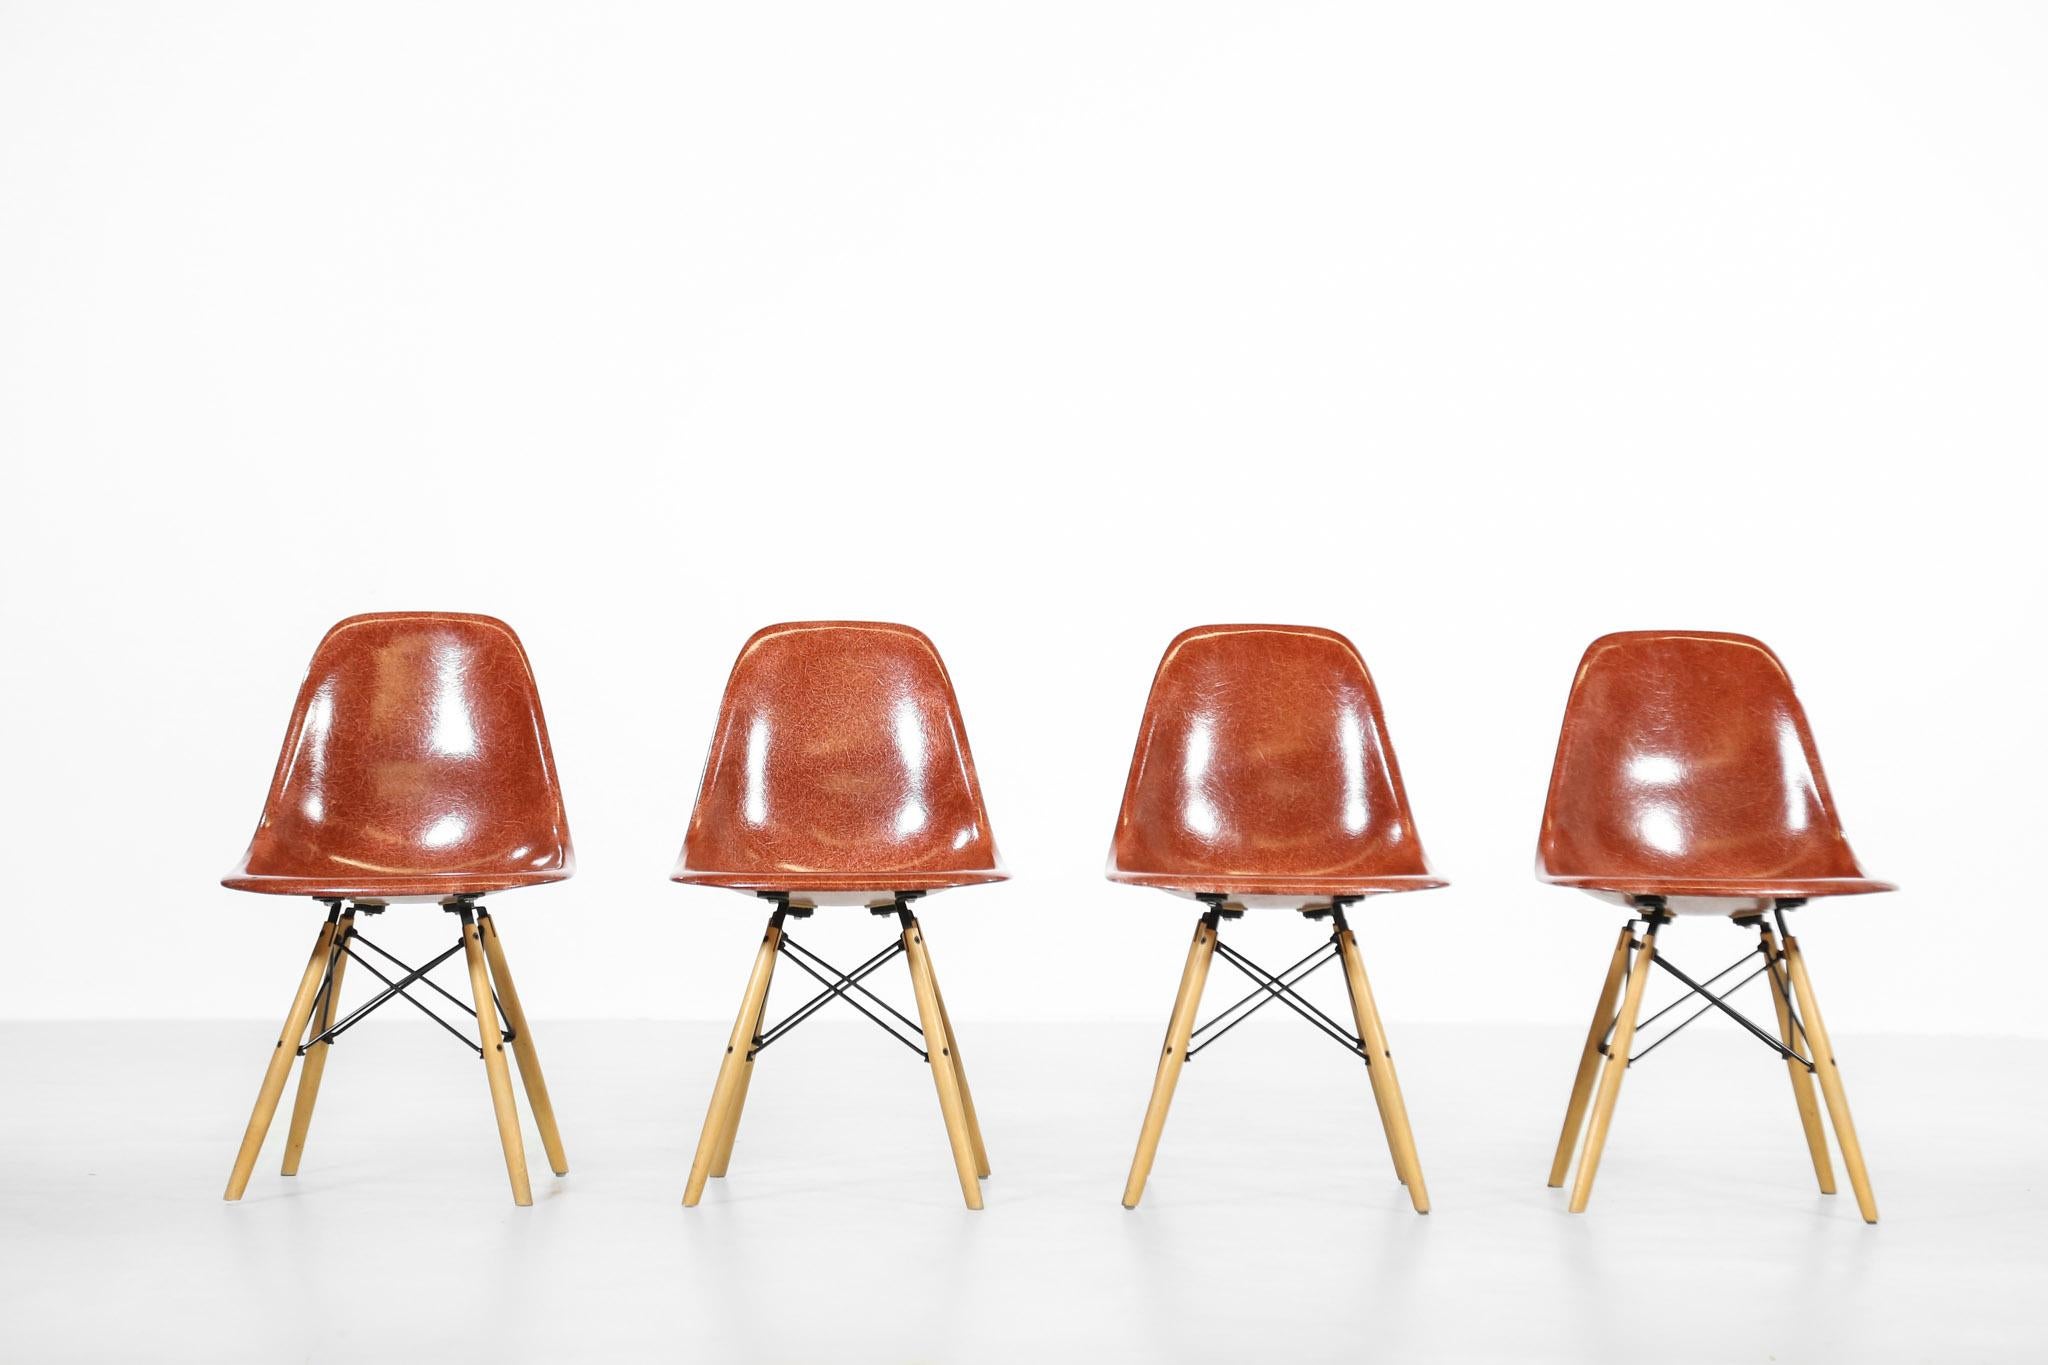 Nice set of four dining chairs by Charles & Ray Eames for Modernica.